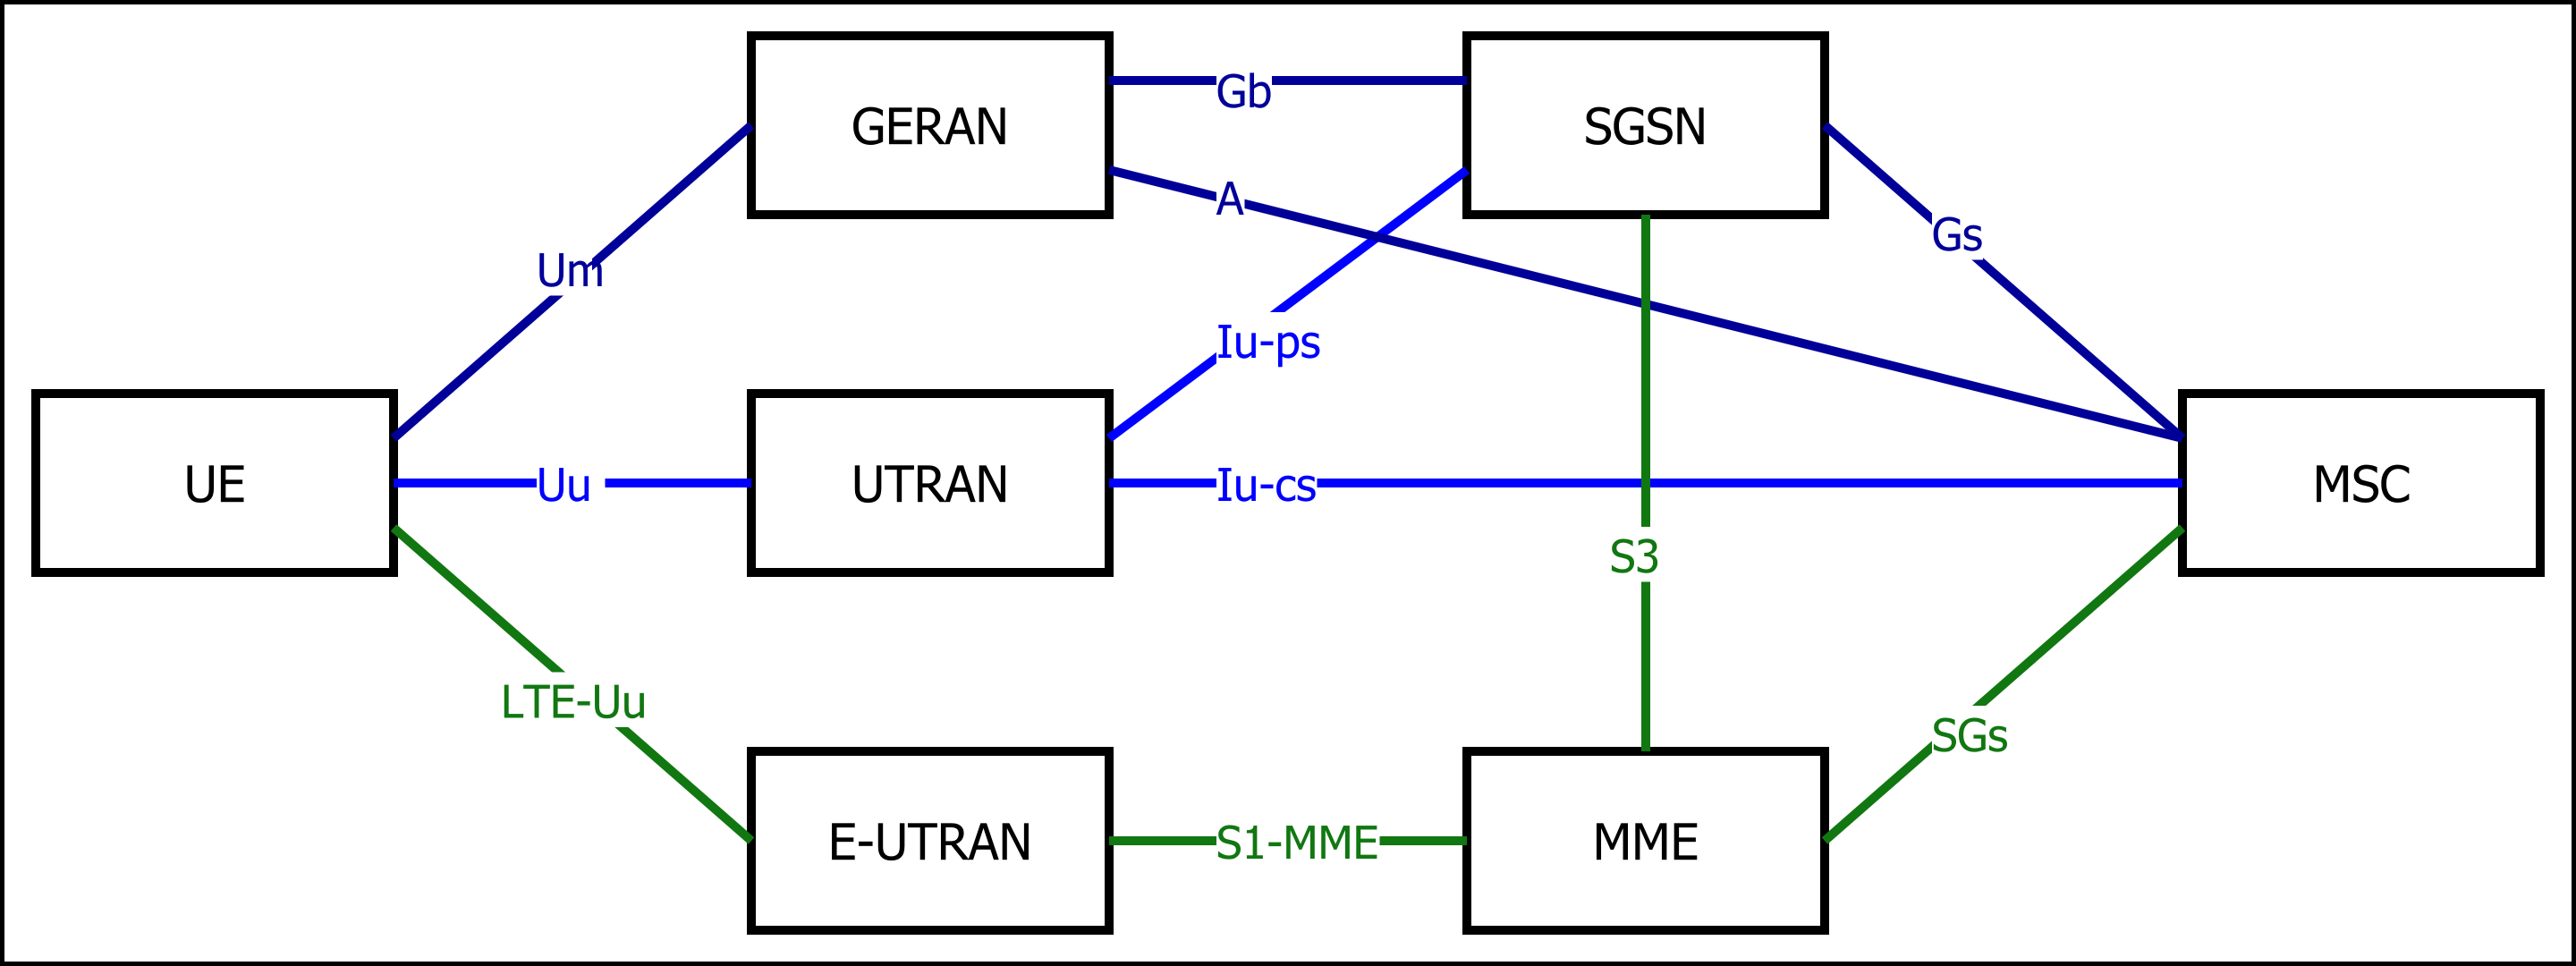 Difference Between NB-IoT and LTE-M